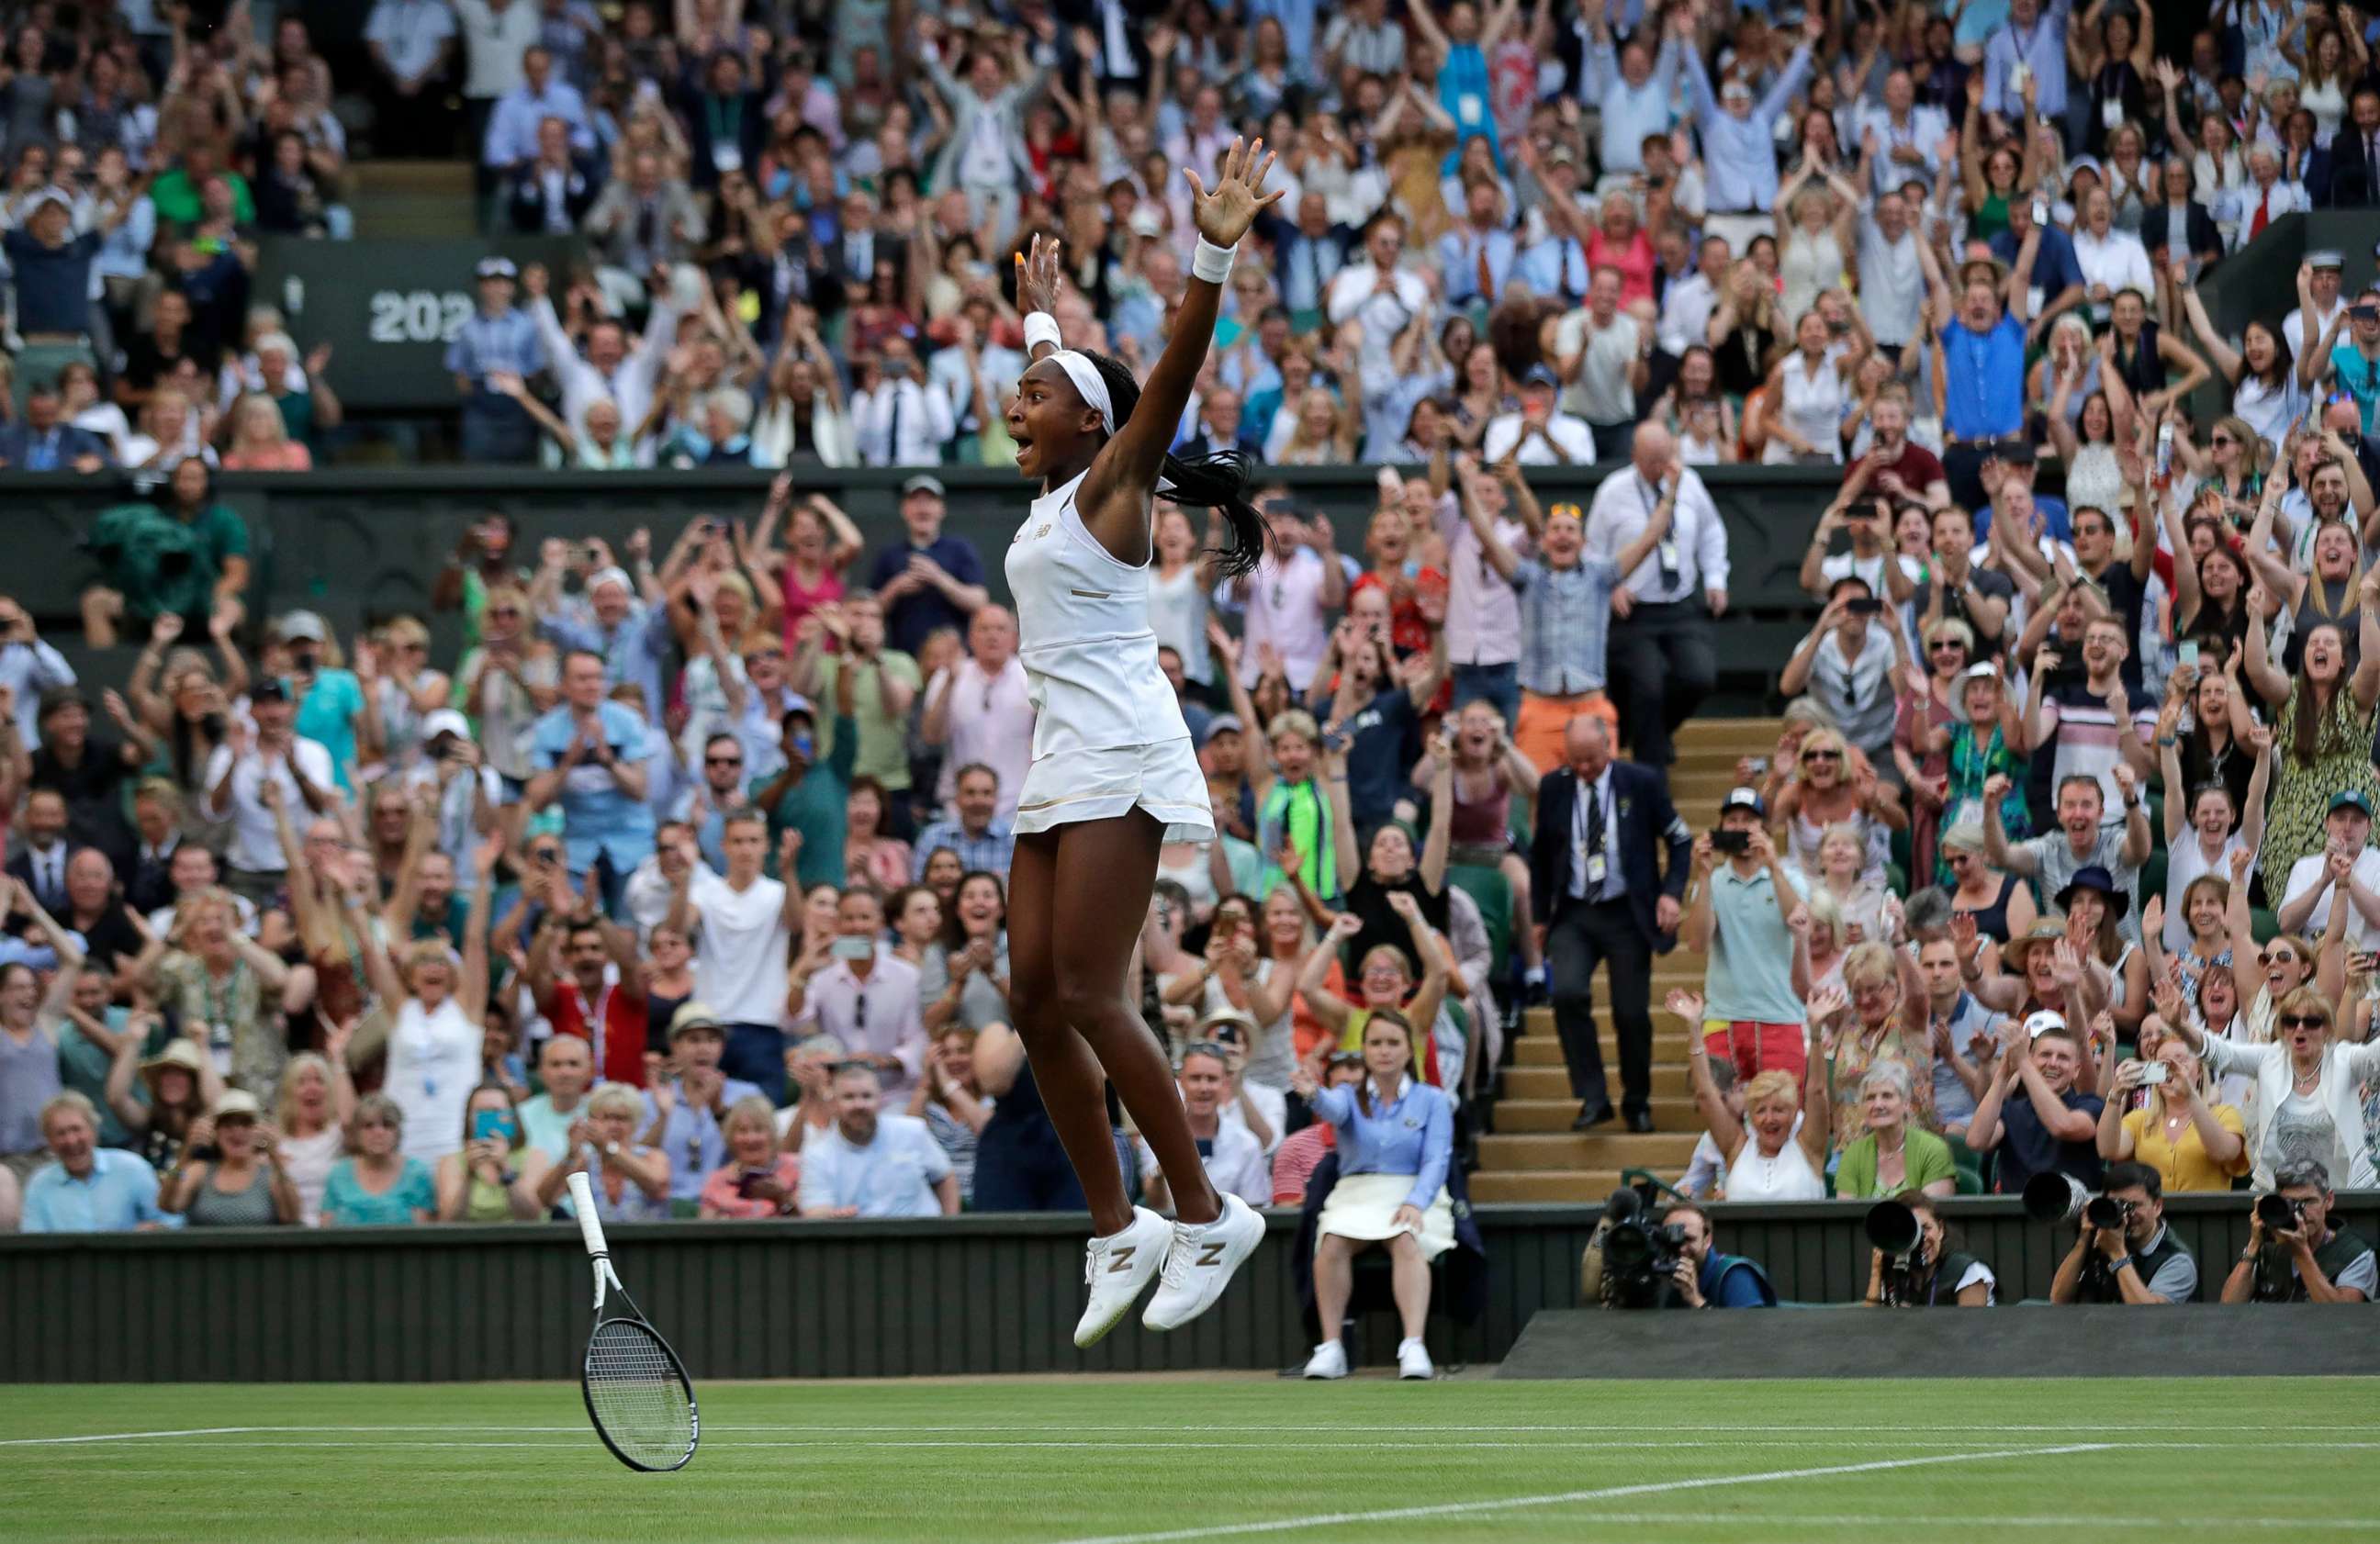 PHOTO: United States' Cori "Coco" Gauff celebrates after beating Slovenia's Polona Hercog in a Women's singles match during day five of the Wimbledon Tennis Championships in London, July 5, 2019.